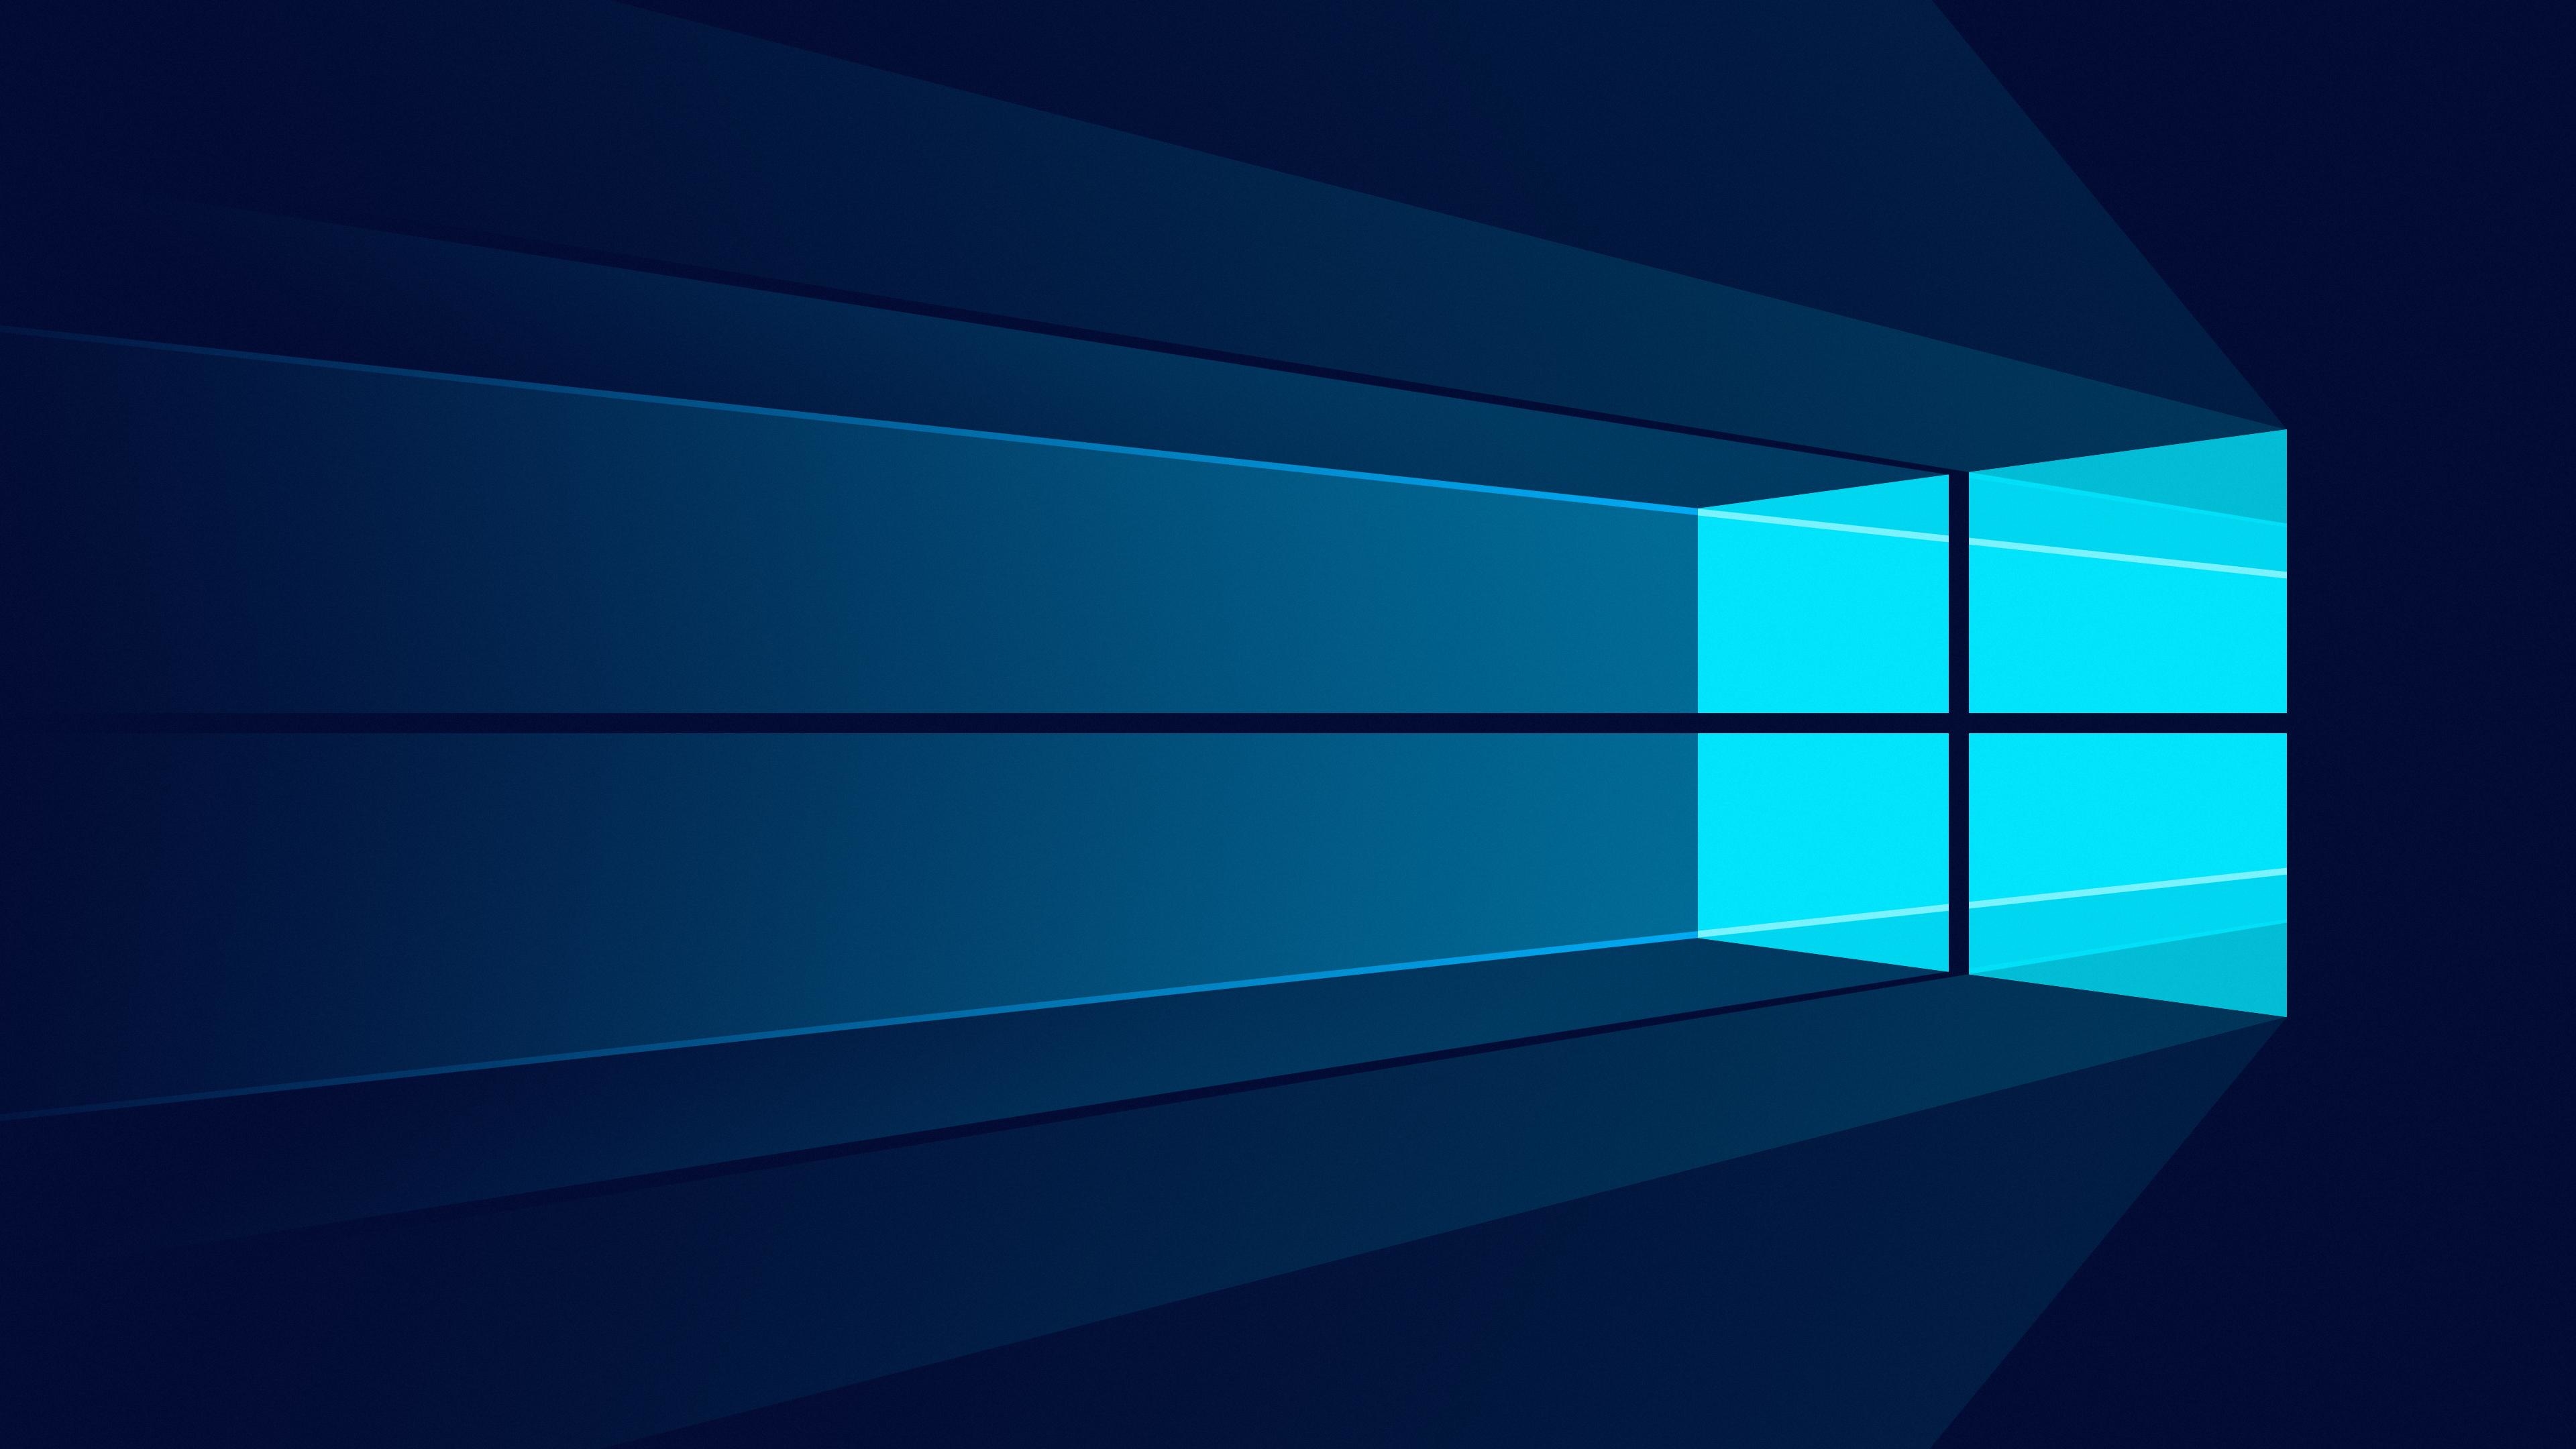 1280x800 Windows 10 Minimal 1280x800 Resolution Wallpaper Hd Minimalist 4k Wallpapers Images Photos And Background